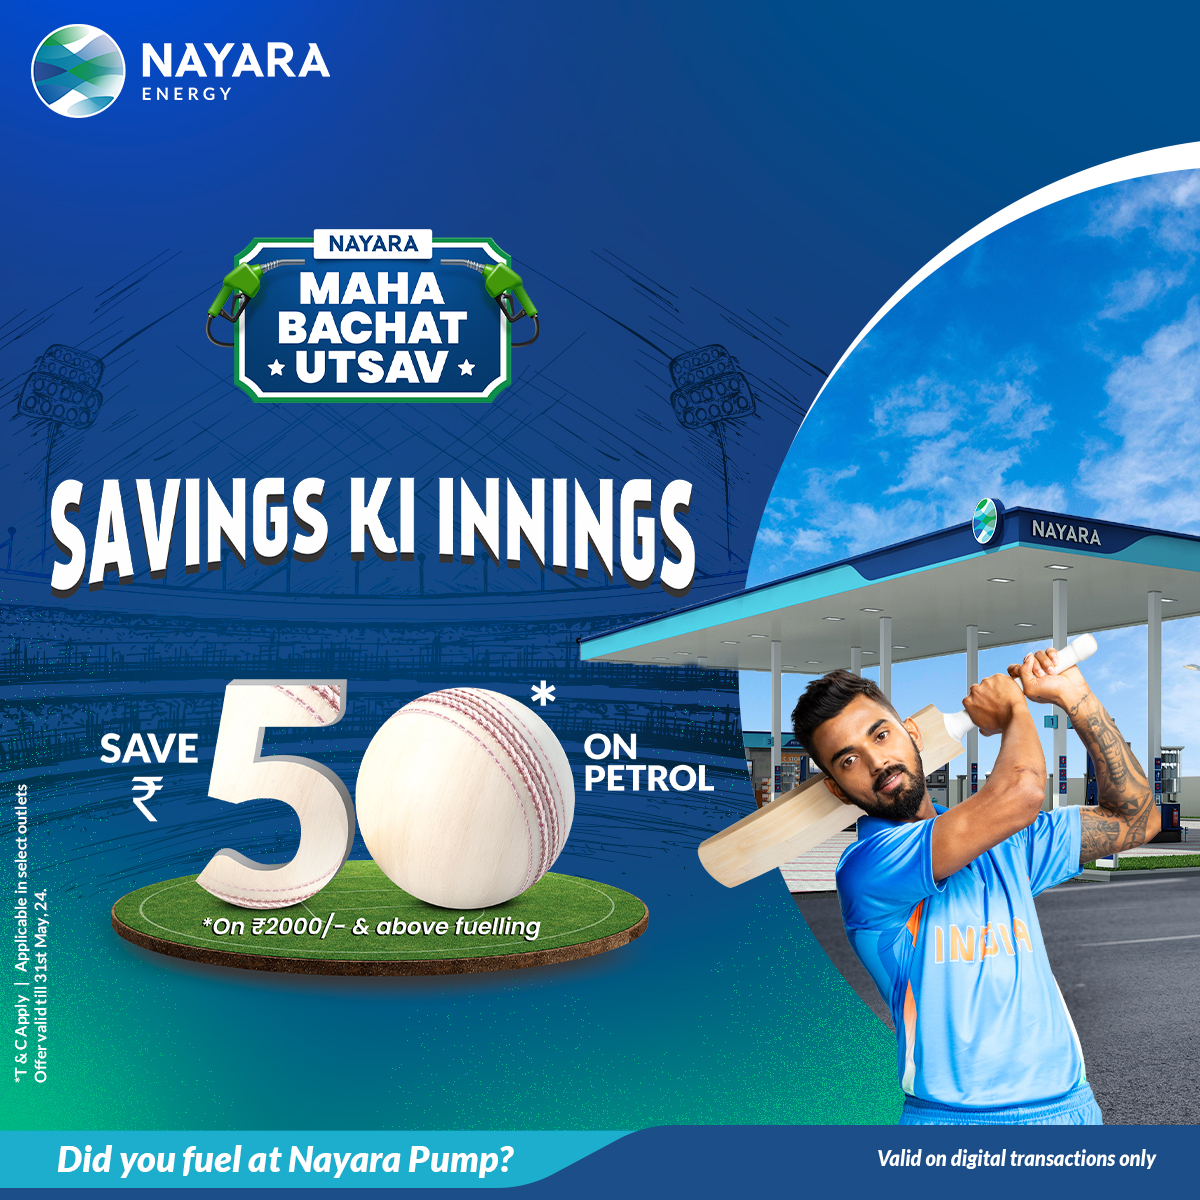 🚨 Offer Alert 🚨 Mahabachat Utsav is now LIVE! Instant Assured ₹50/- on fuelling of ₹2000 & above! HURRY ! Limited Time! Visit Nayara Pump today. T&C apply. Applicable in select outlets. #NayaraPumps #NayaraEnergy #SavingsKiInnings #MahabachatUtsav #FuelSavings #Savings